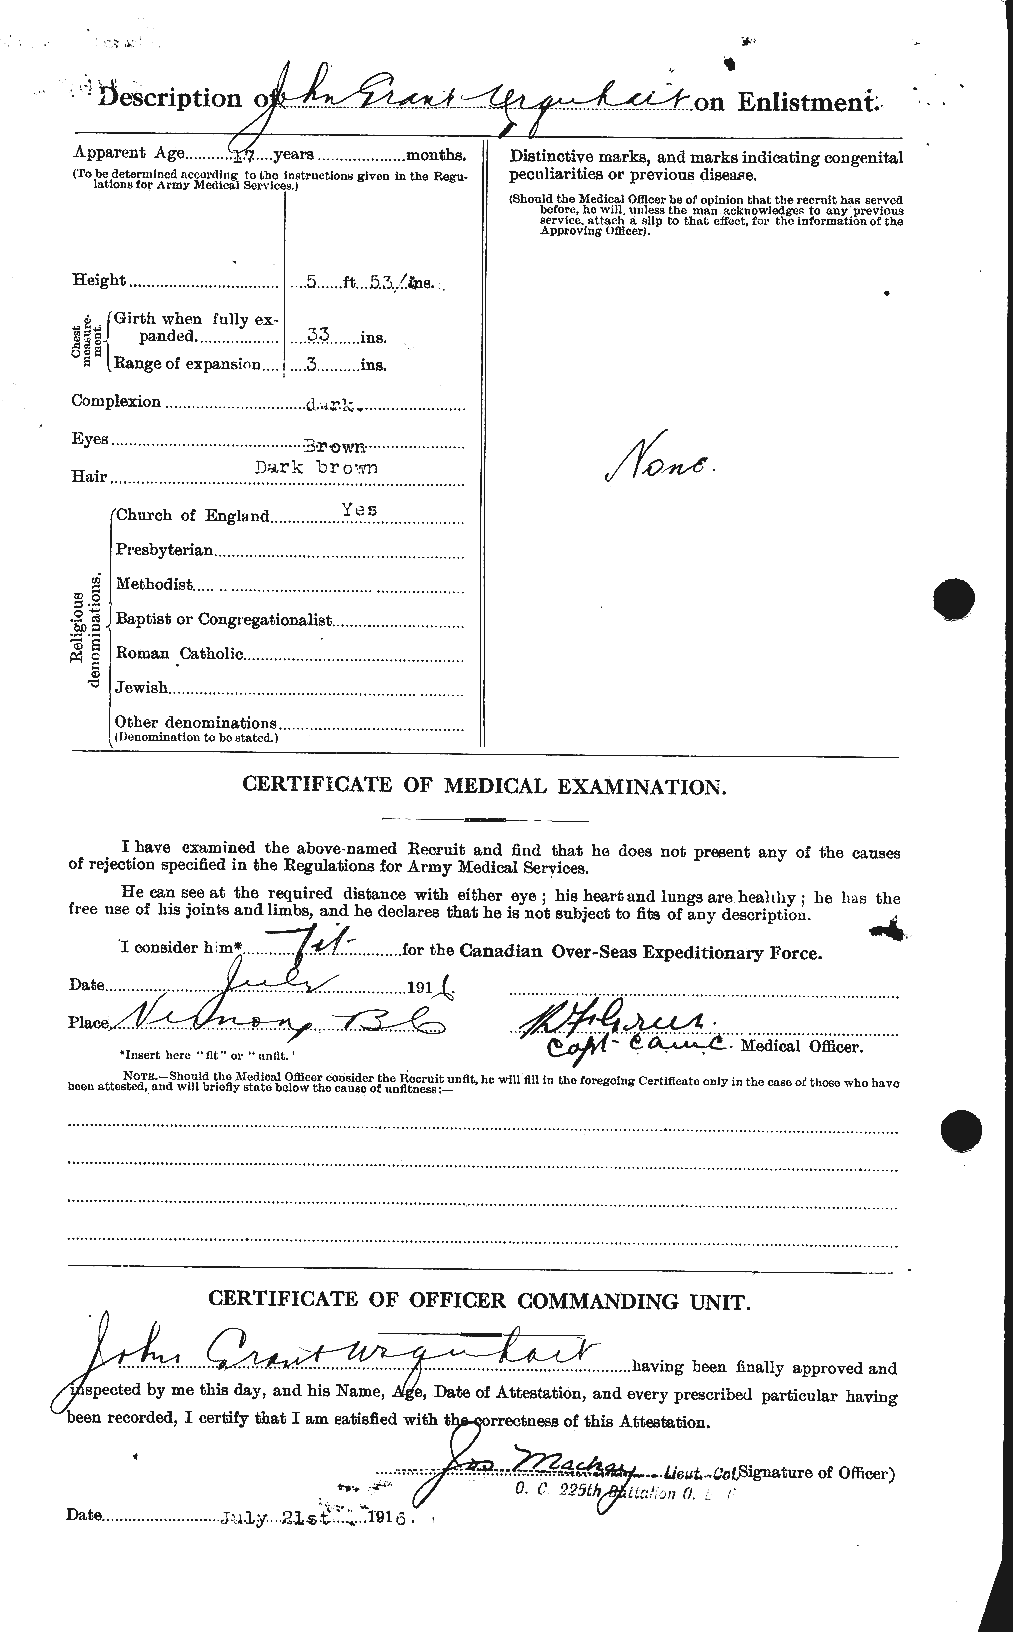 Personnel Records of the First World War - CEF 643375b